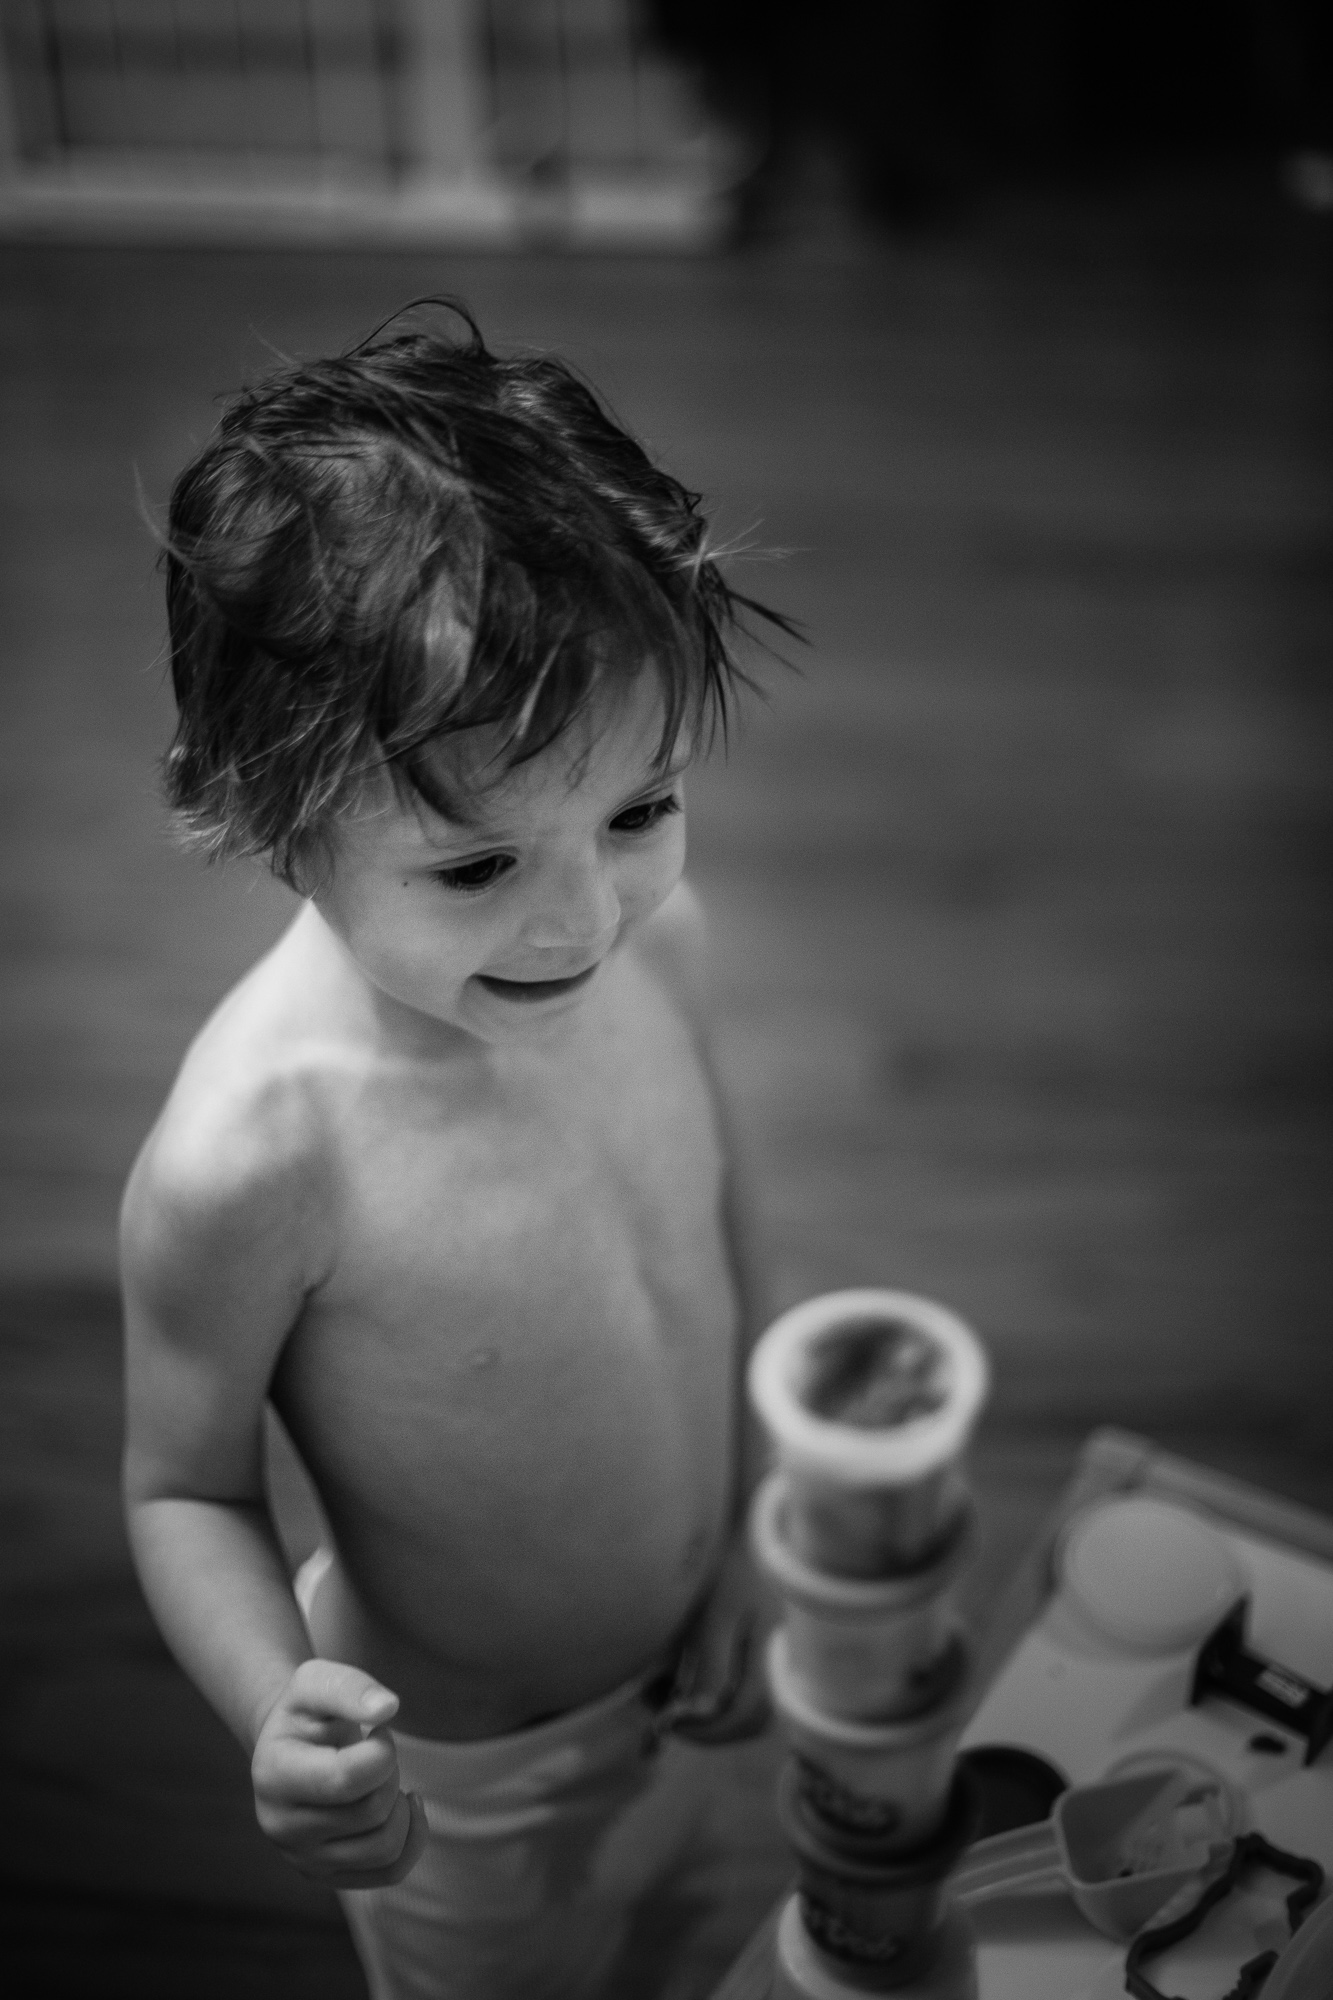 black and white photography. Kid playing with Hasbro Play-doh